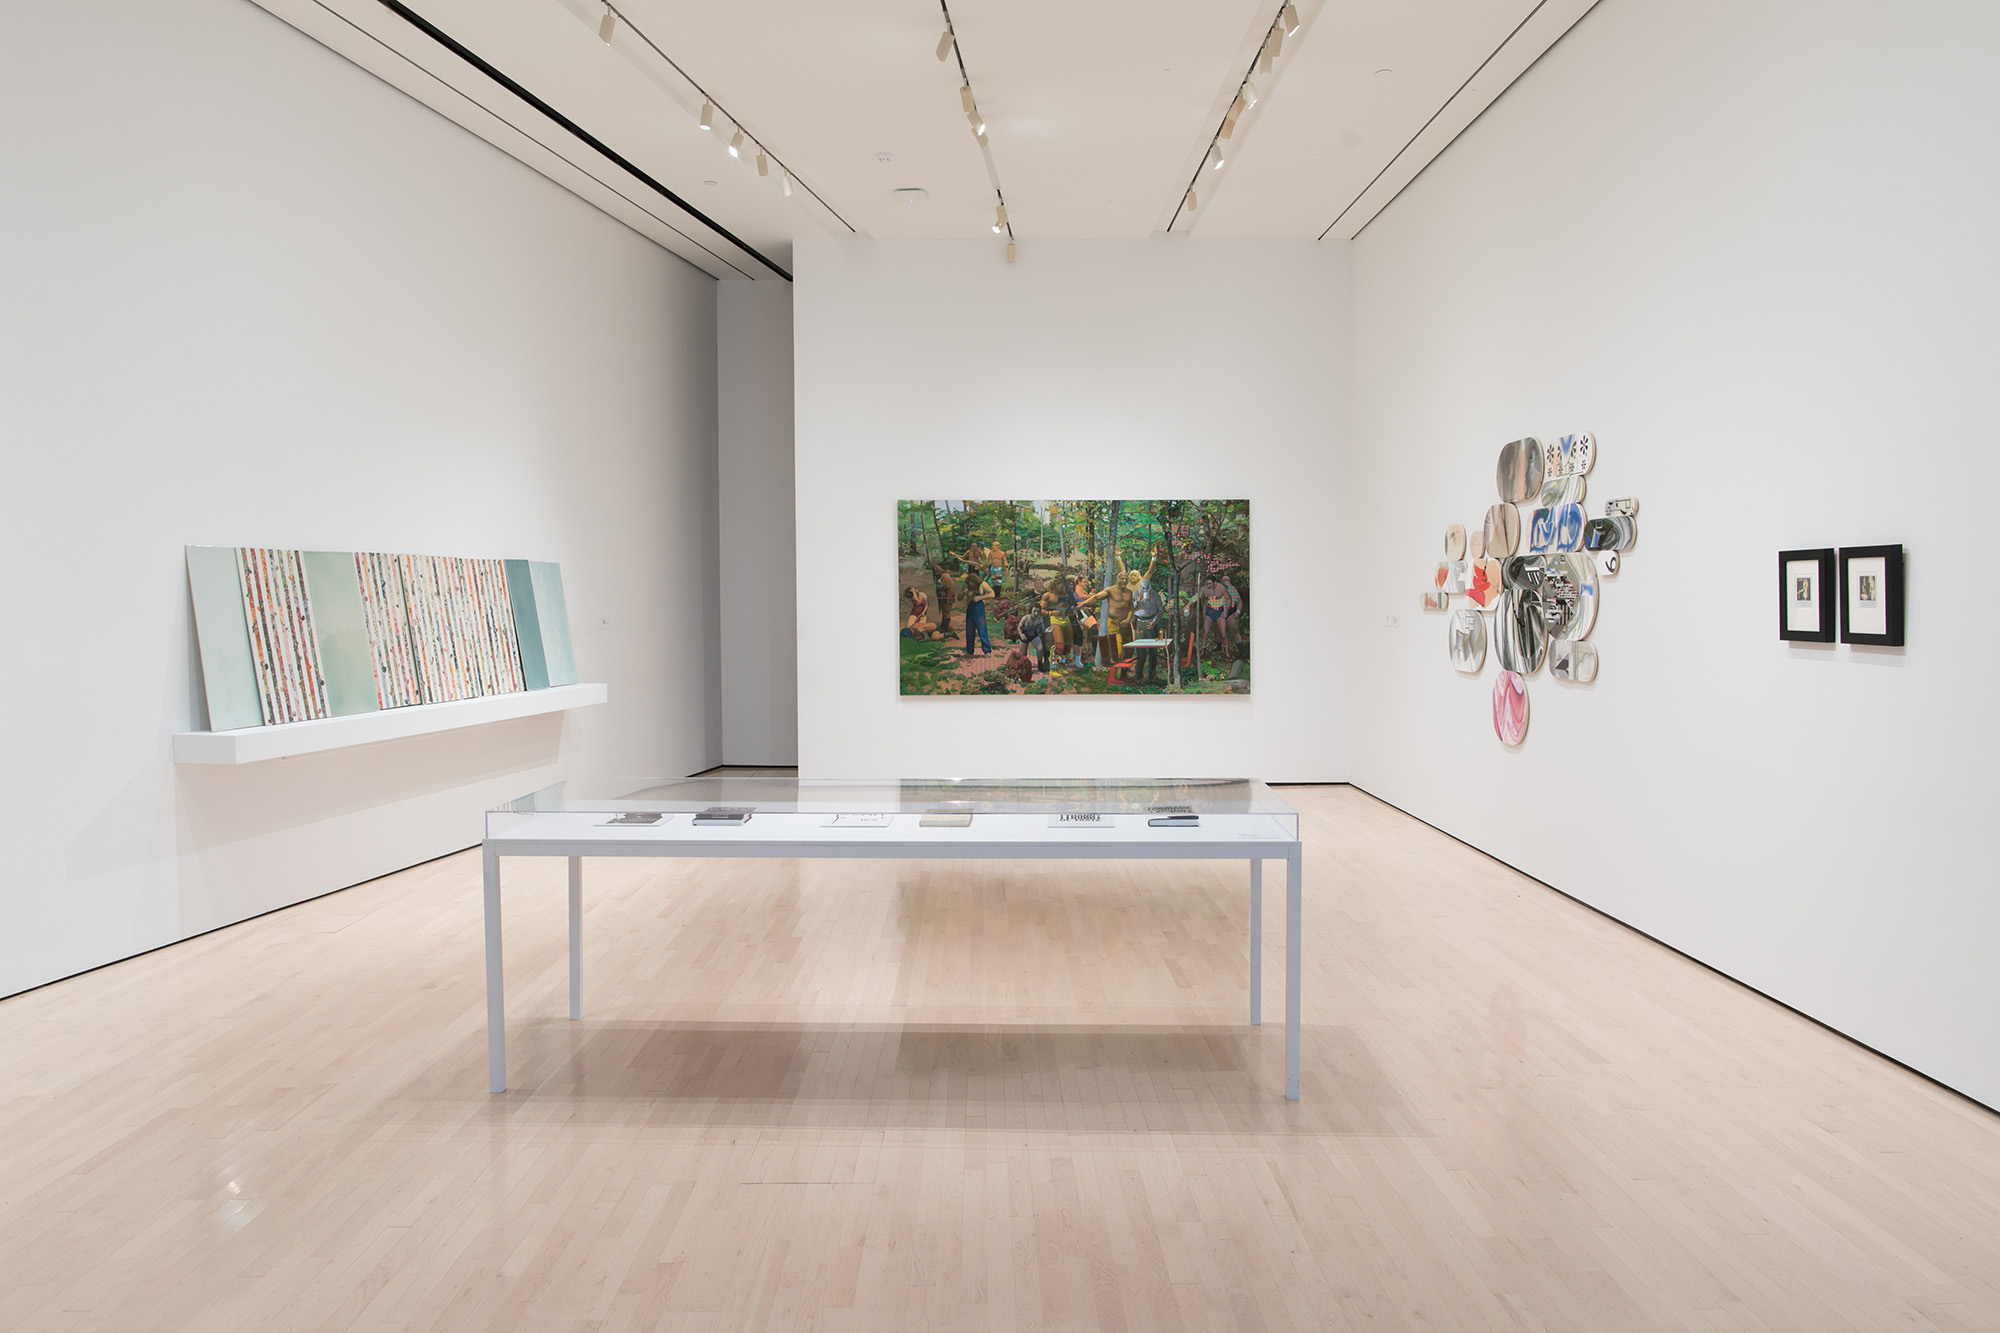 2018 MSU Department of Art, Art History, and Design Faculty Triennial, installation view at the MSU Broad, 2018. Photo: Eat Pomegranate Photography